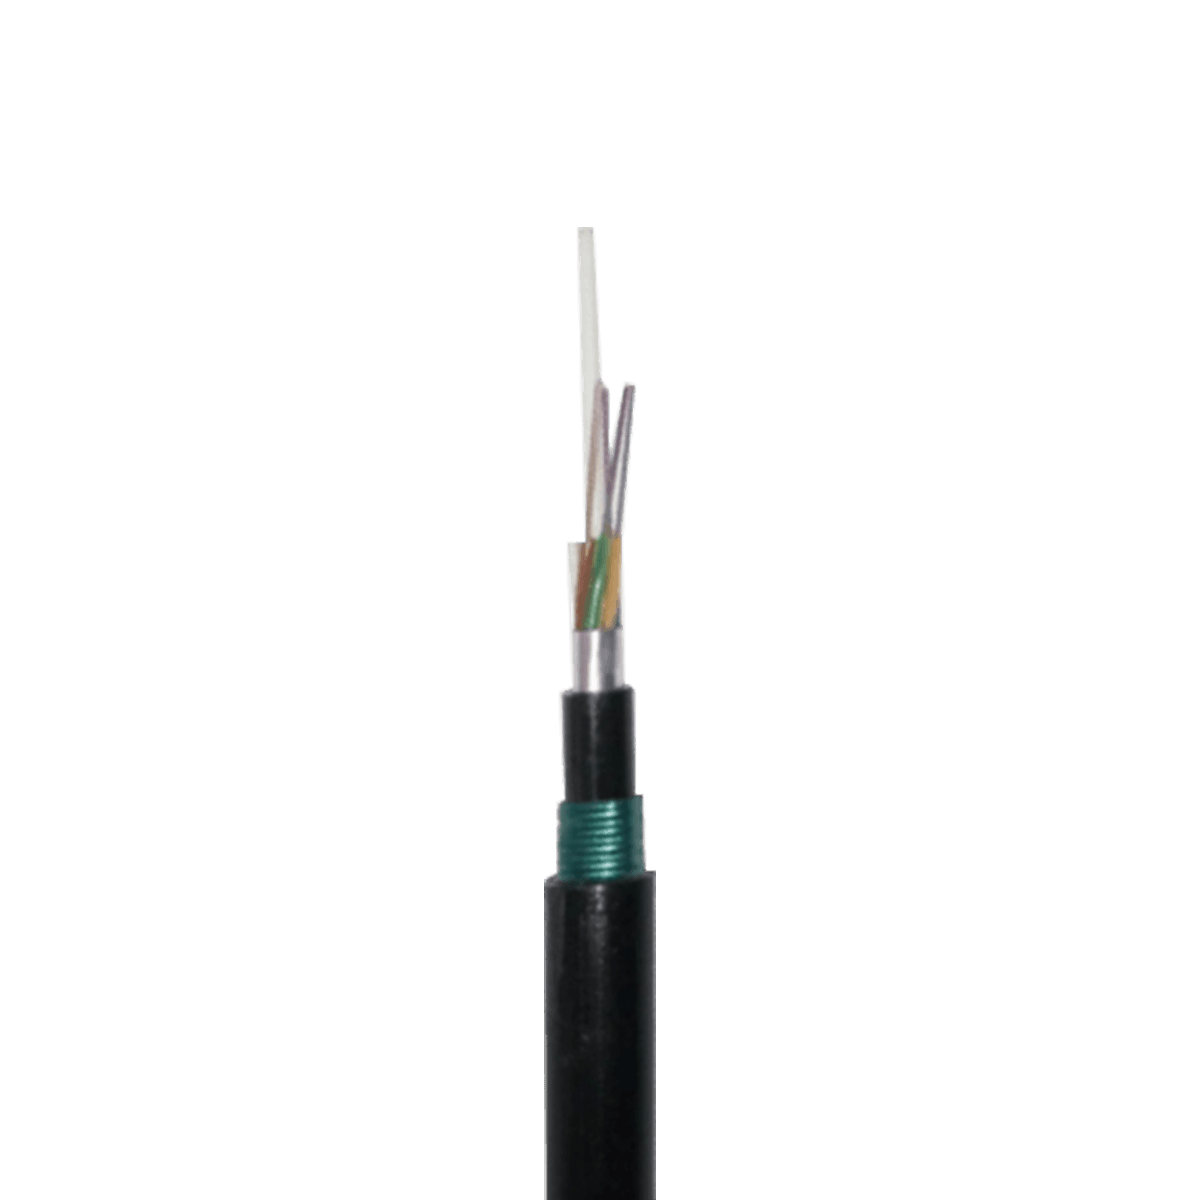 Standed Loose Tube Non-metallic Strength Member armored Cable